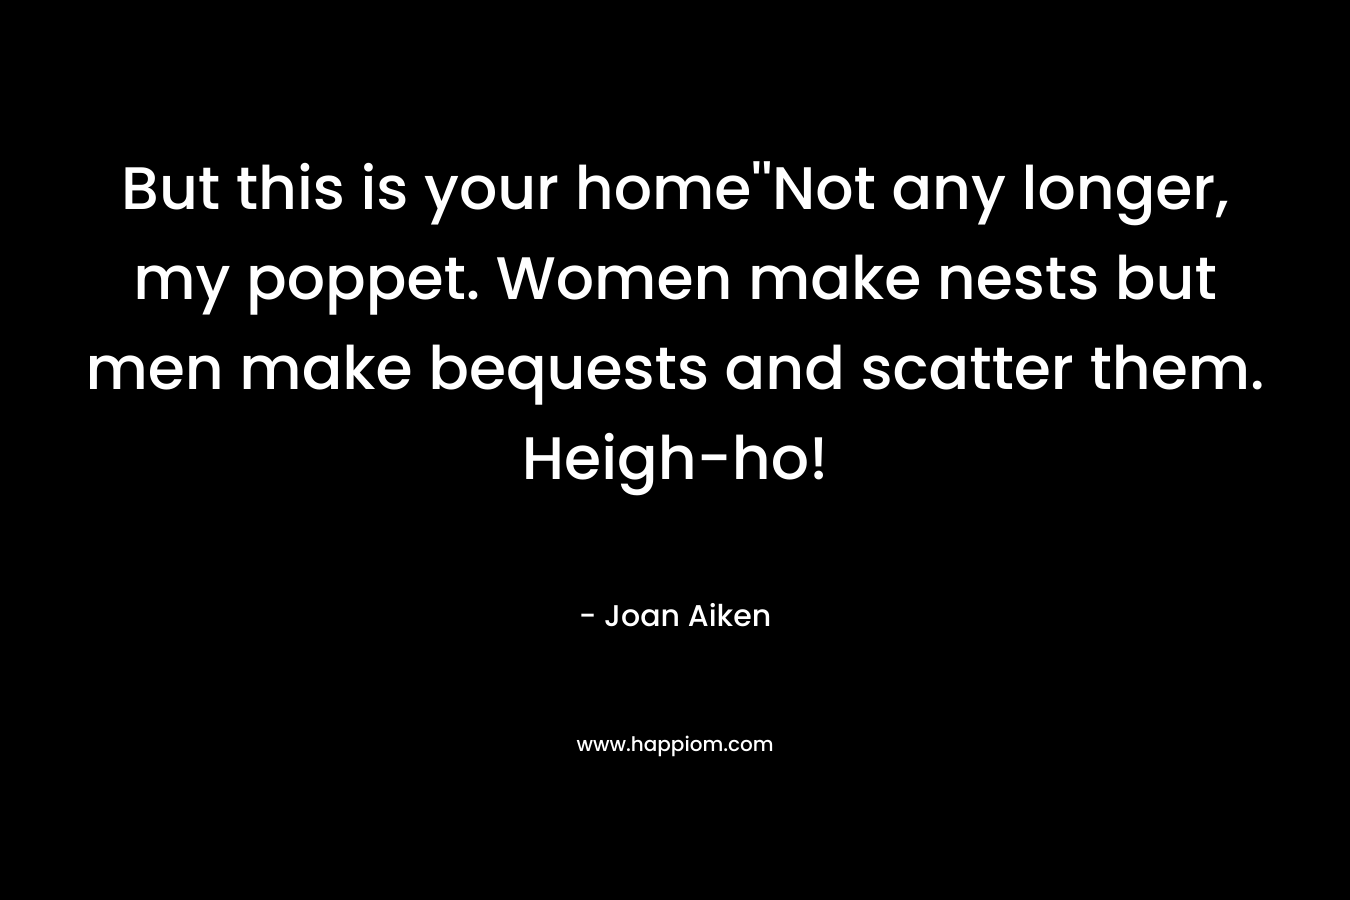 But this is your home”Not any longer, my poppet. Women make nests but men make bequests and scatter them. Heigh-ho! – Joan Aiken